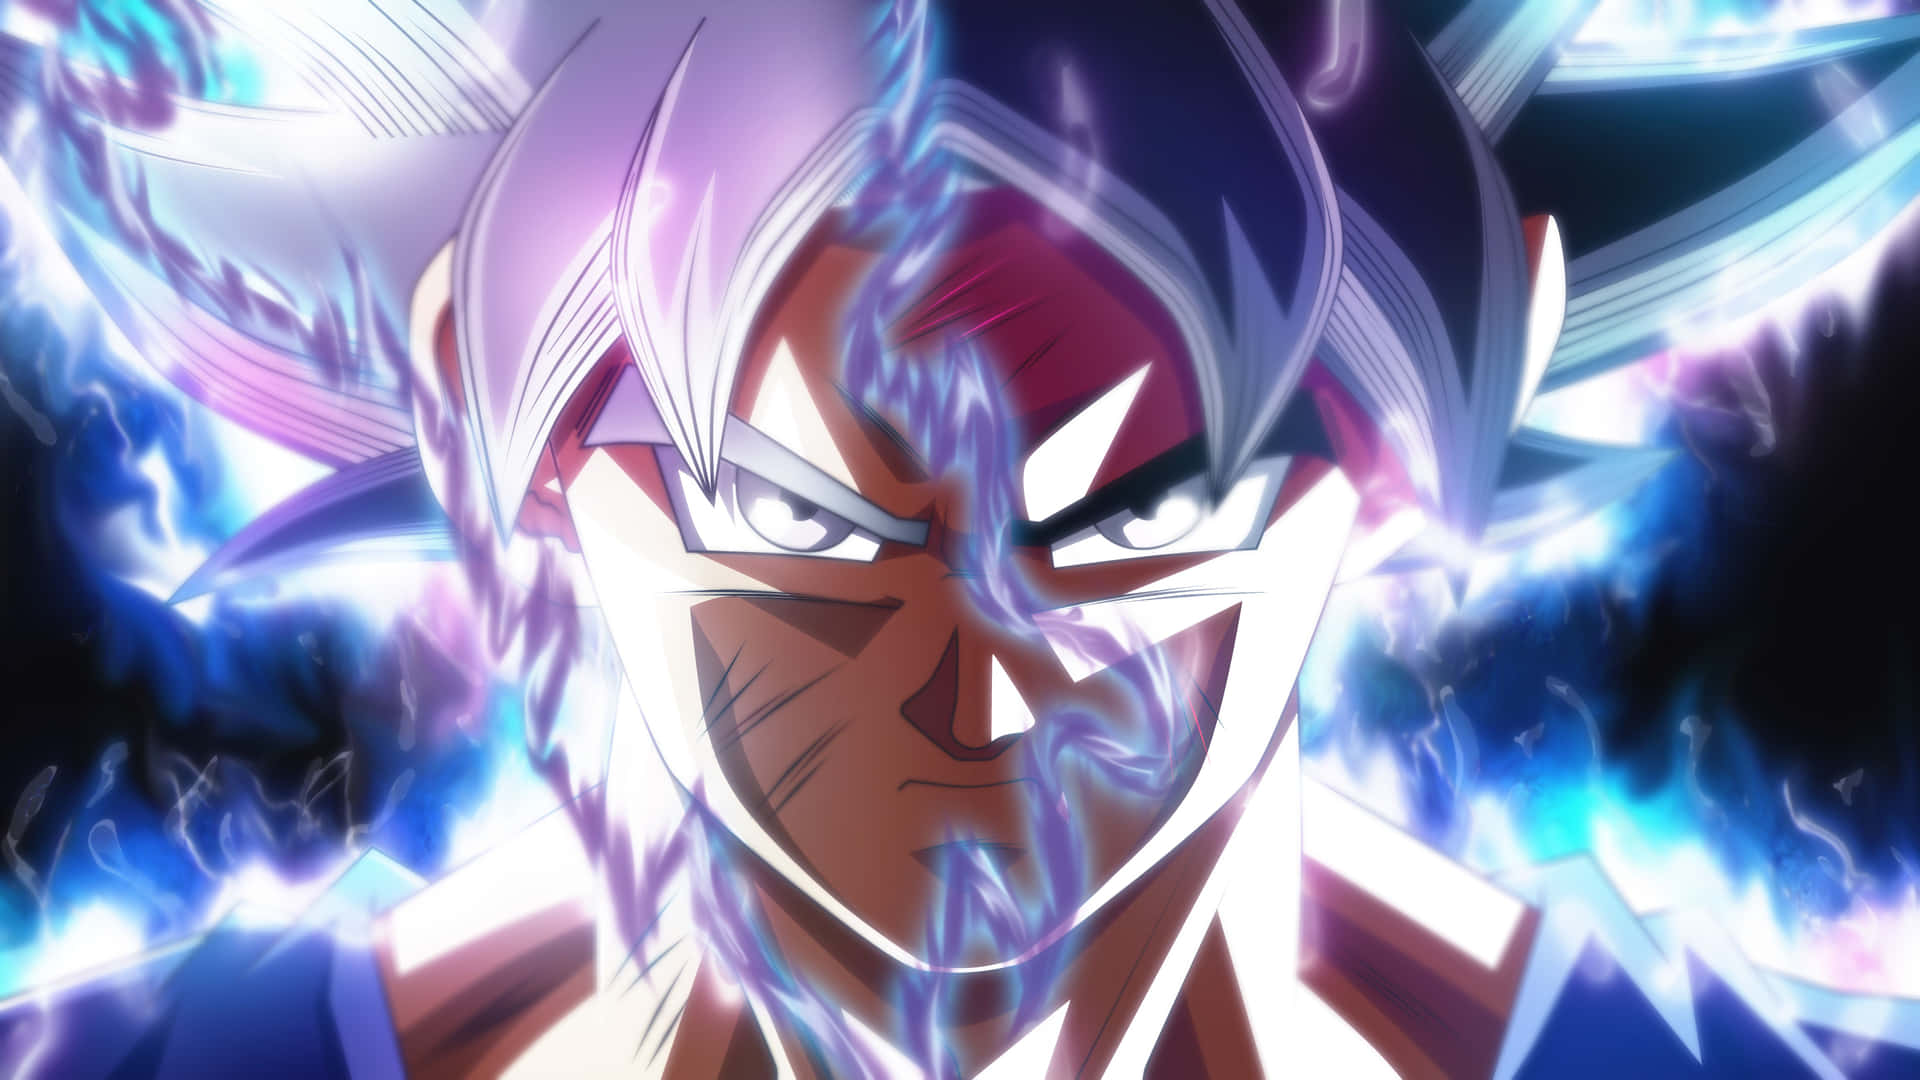 Goku has achieved the ultimate power of Ultra Instinct! Wallpaper